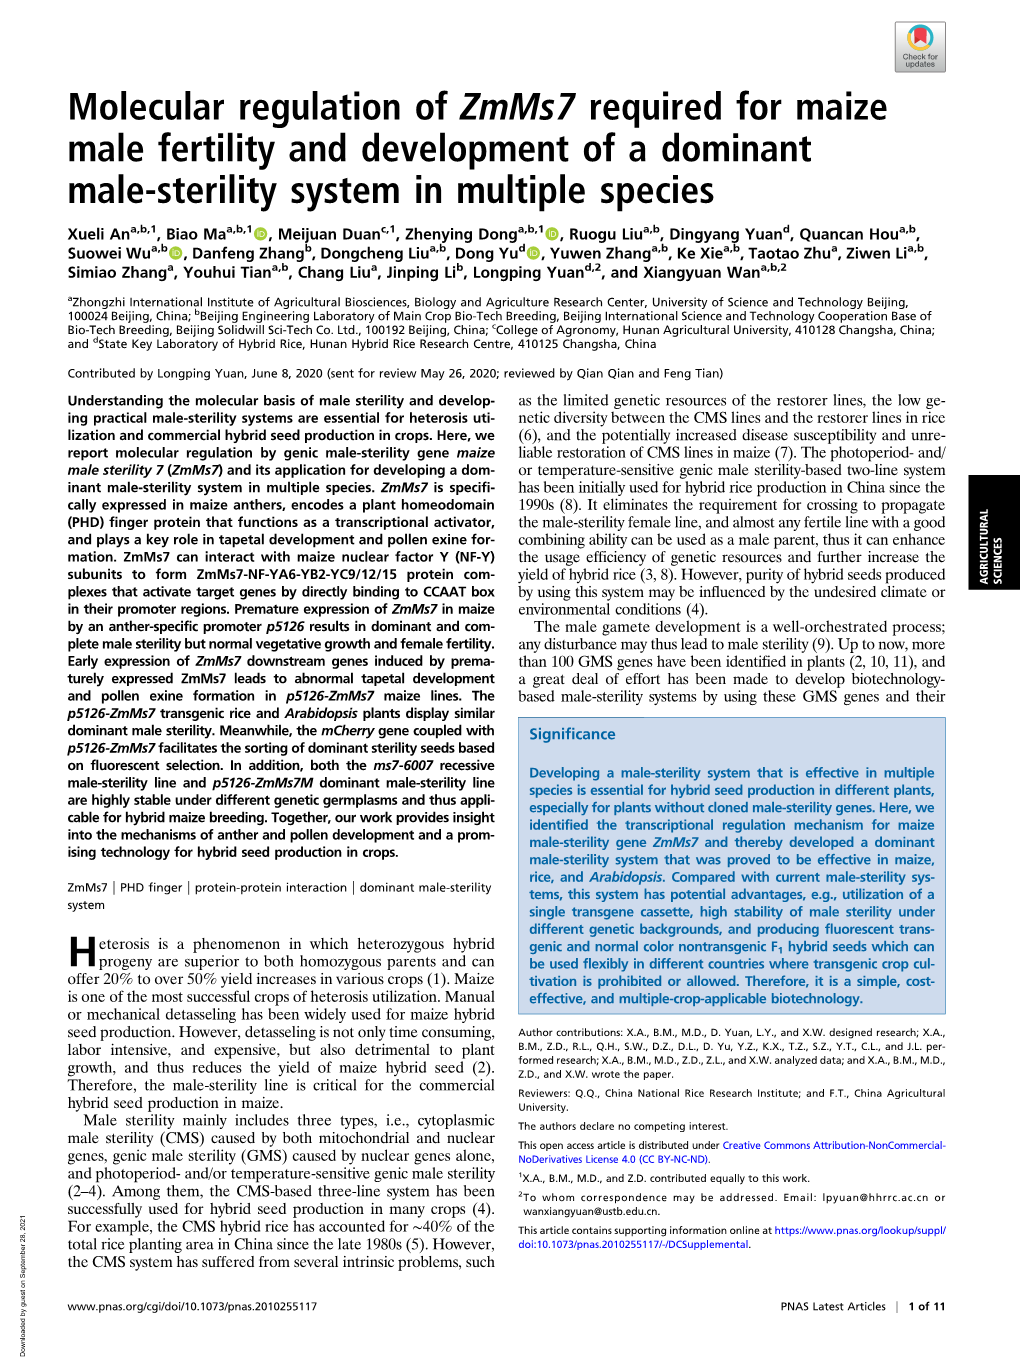 Molecular Regulation of Zmms7 Required for Maize Male Fertility and Development of a Dominant Male-Sterility System in Multiple Species